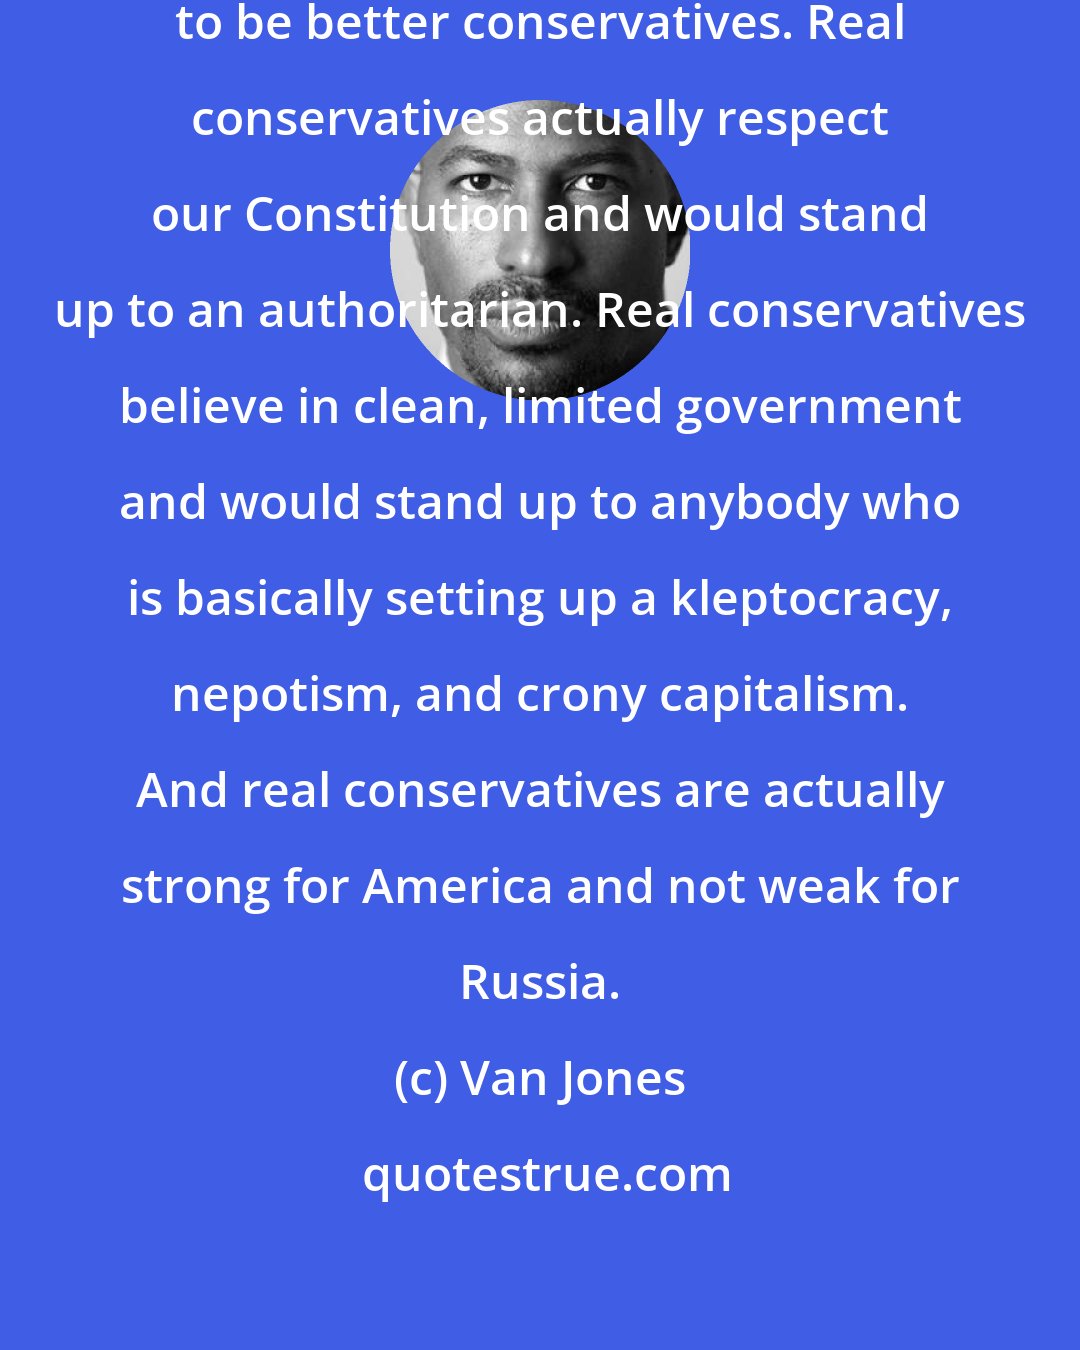 Van Jones: Frankly, the conservatives need to be better conservatives. Real conservatives actually respect our Constitution and would stand up to an authoritarian. Real conservatives believe in clean, limited government and would stand up to anybody who is basically setting up a kleptocracy, nepotism, and crony capitalism. And real conservatives are actually strong for America and not weak for Russia.